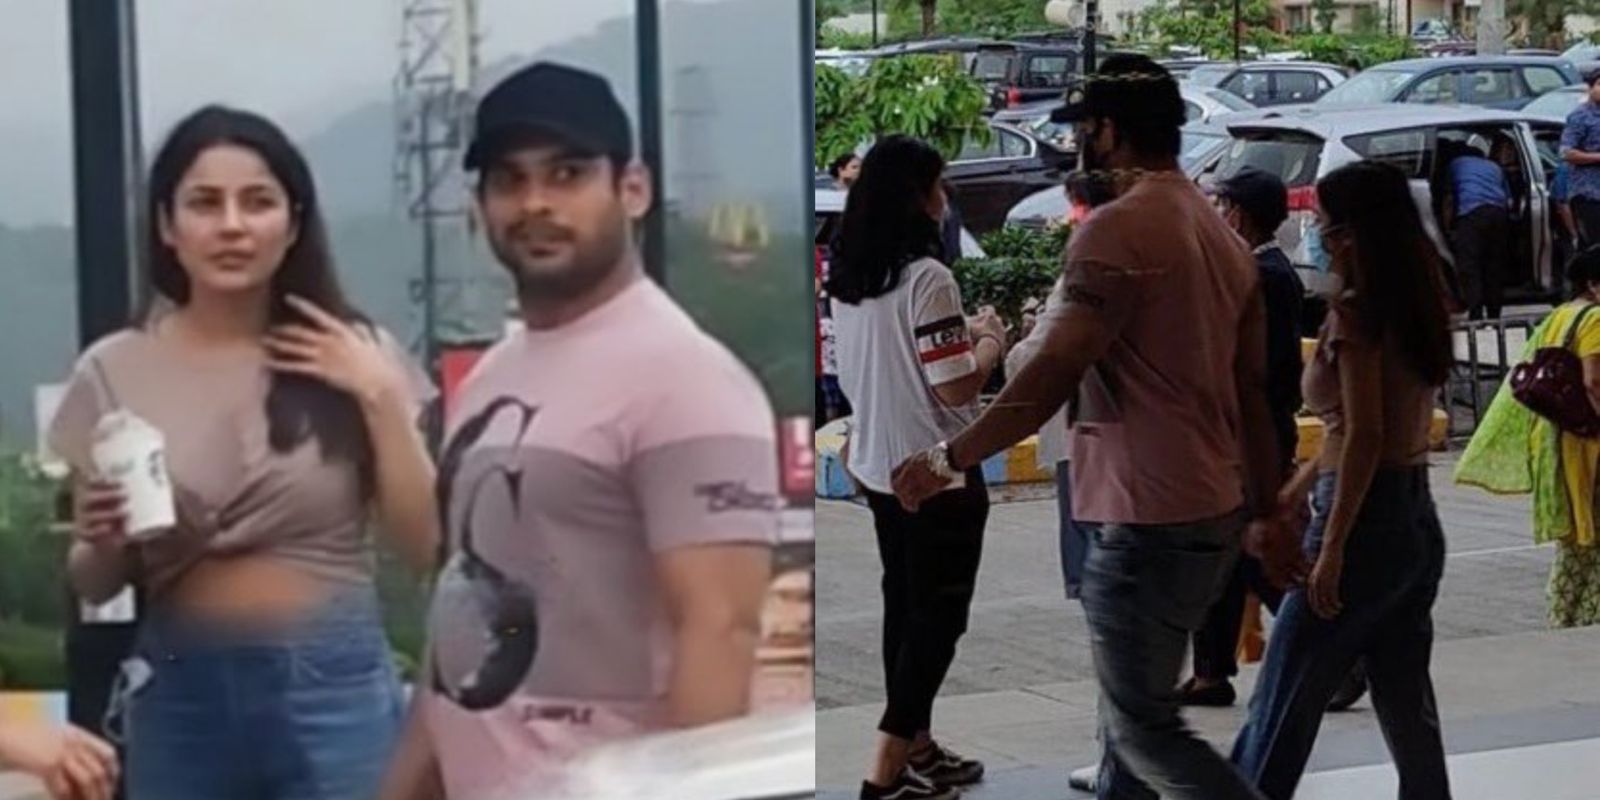 Sidharth Shukla and Shehnaaz Gill leave fans ecstatic as they step out for coffee in matching outfits